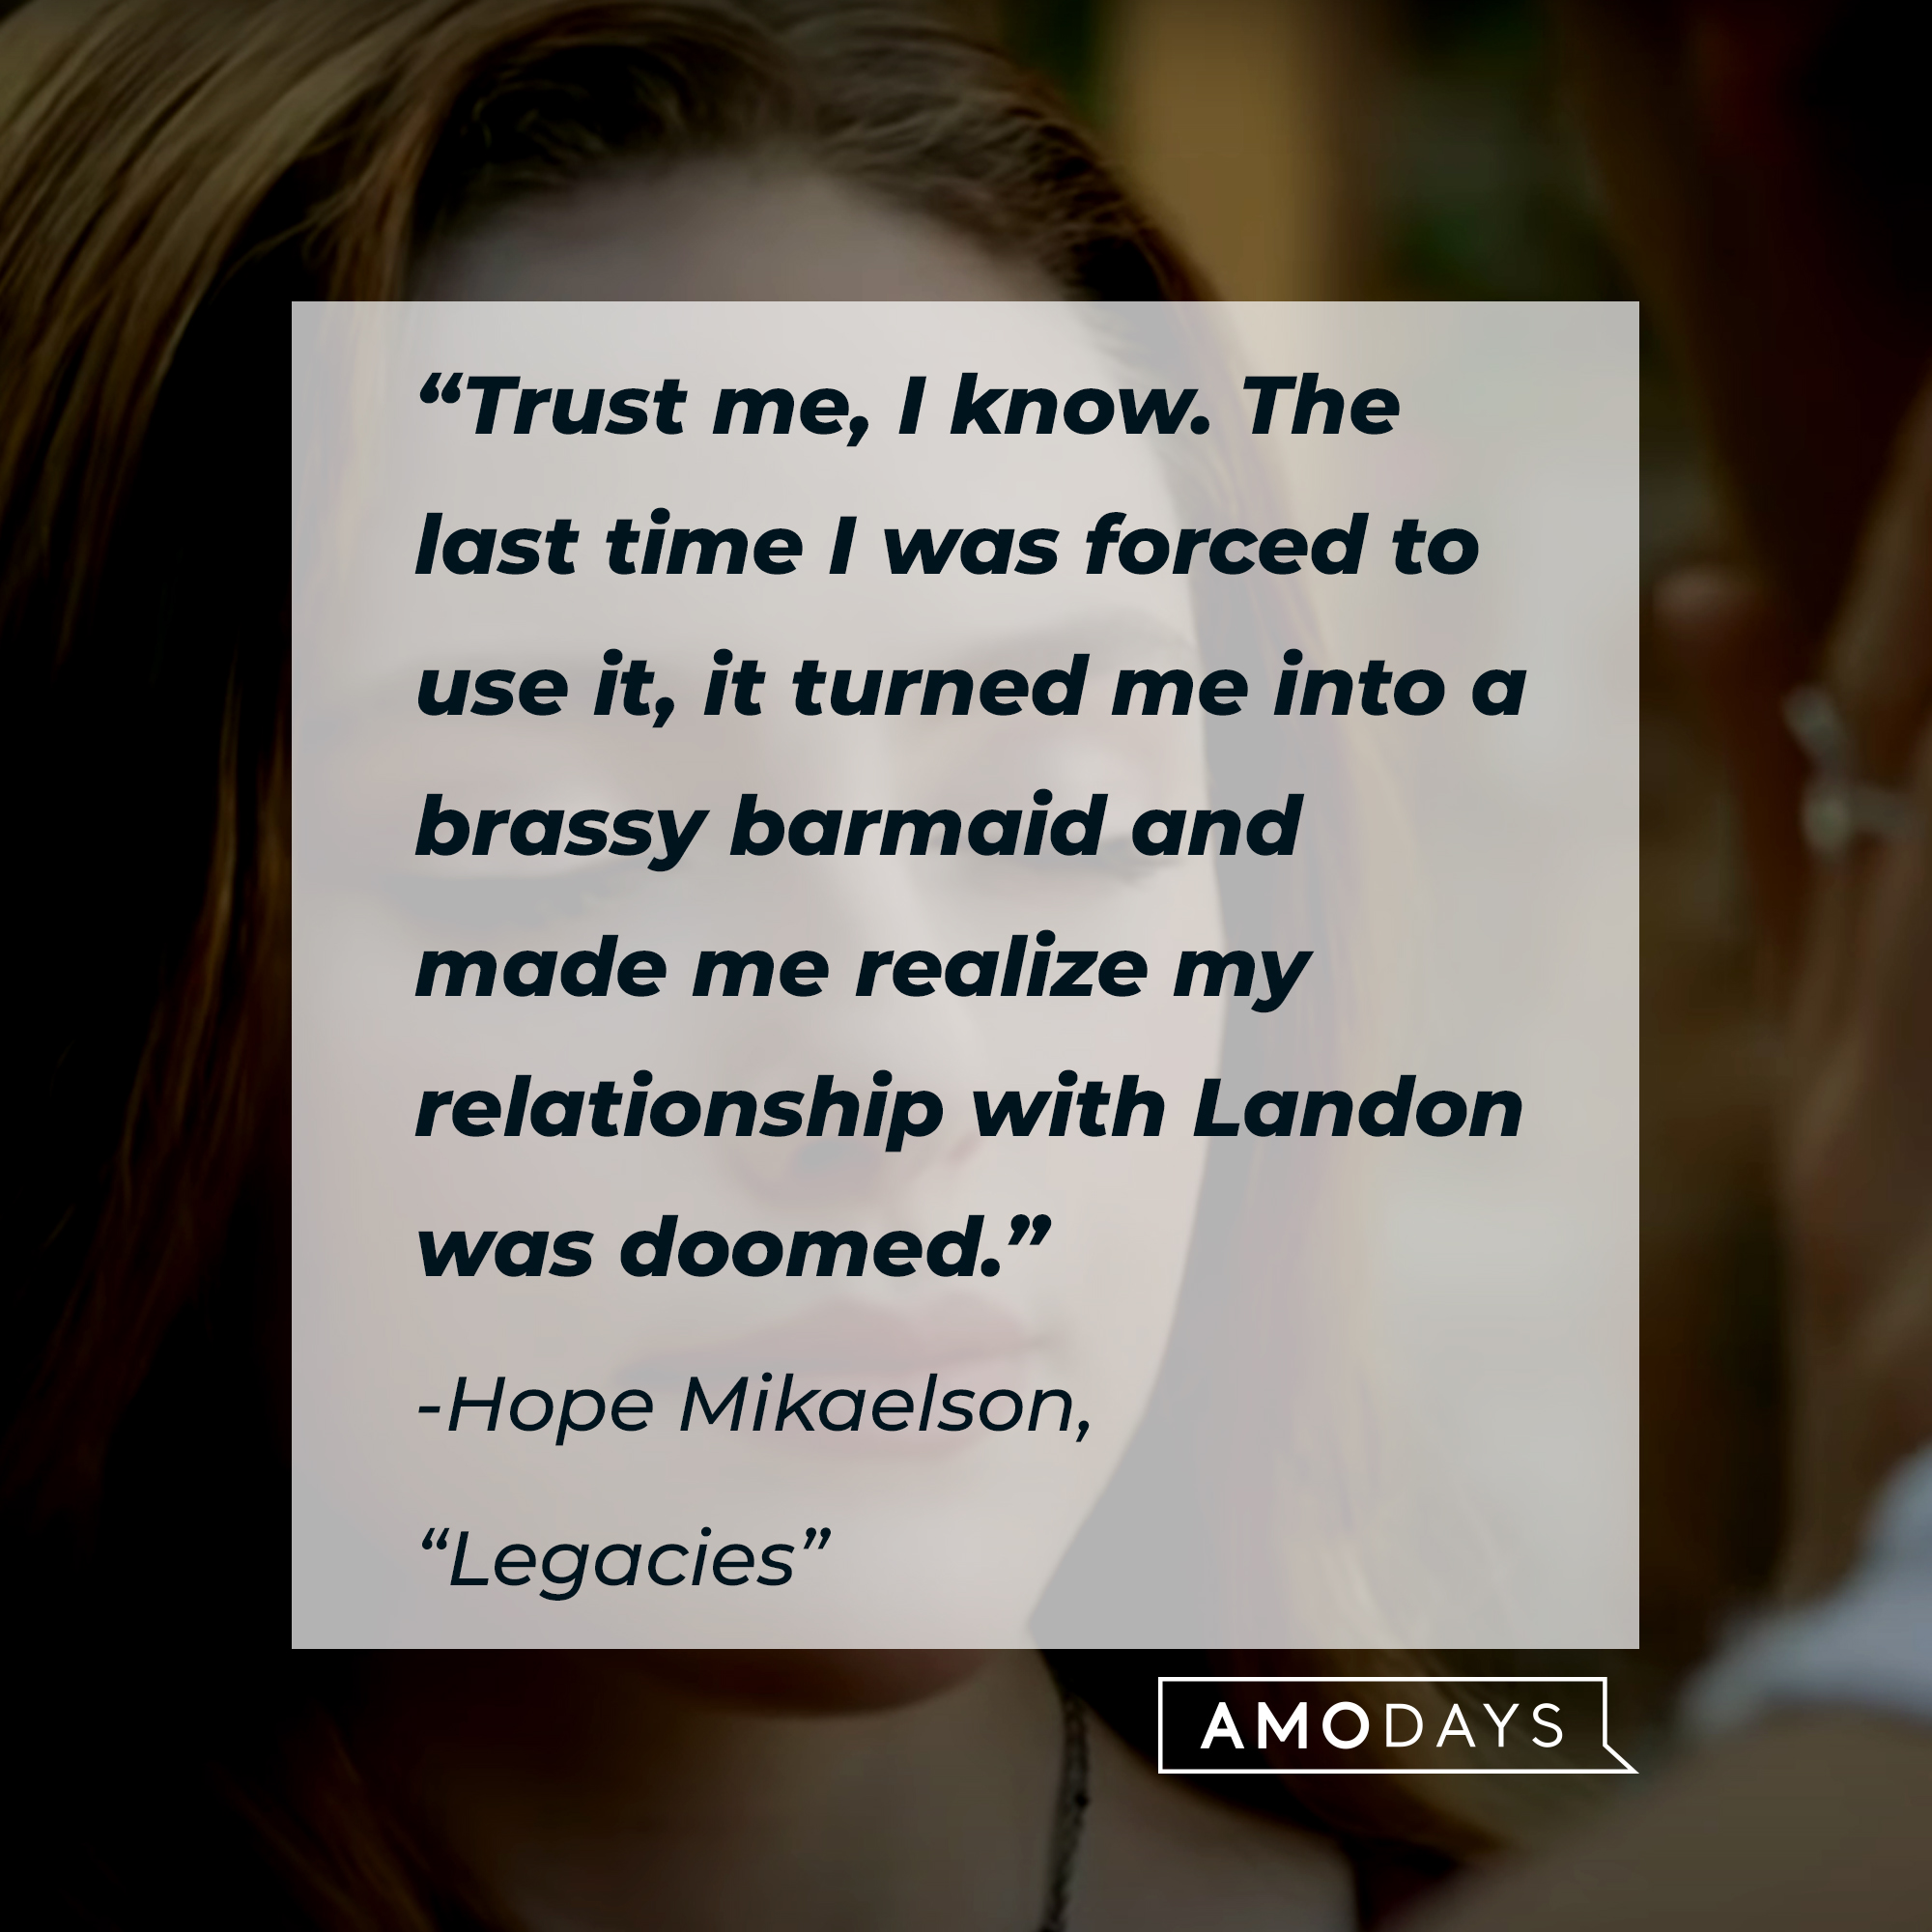 Hope Mikaelson with her quote: “Trust me, I know. The last time I was forced to use it, it turned me into a brassy barmaid and made me realize my relationship with Landon was doomed.” | Source: Facebook.com/CWLegacies